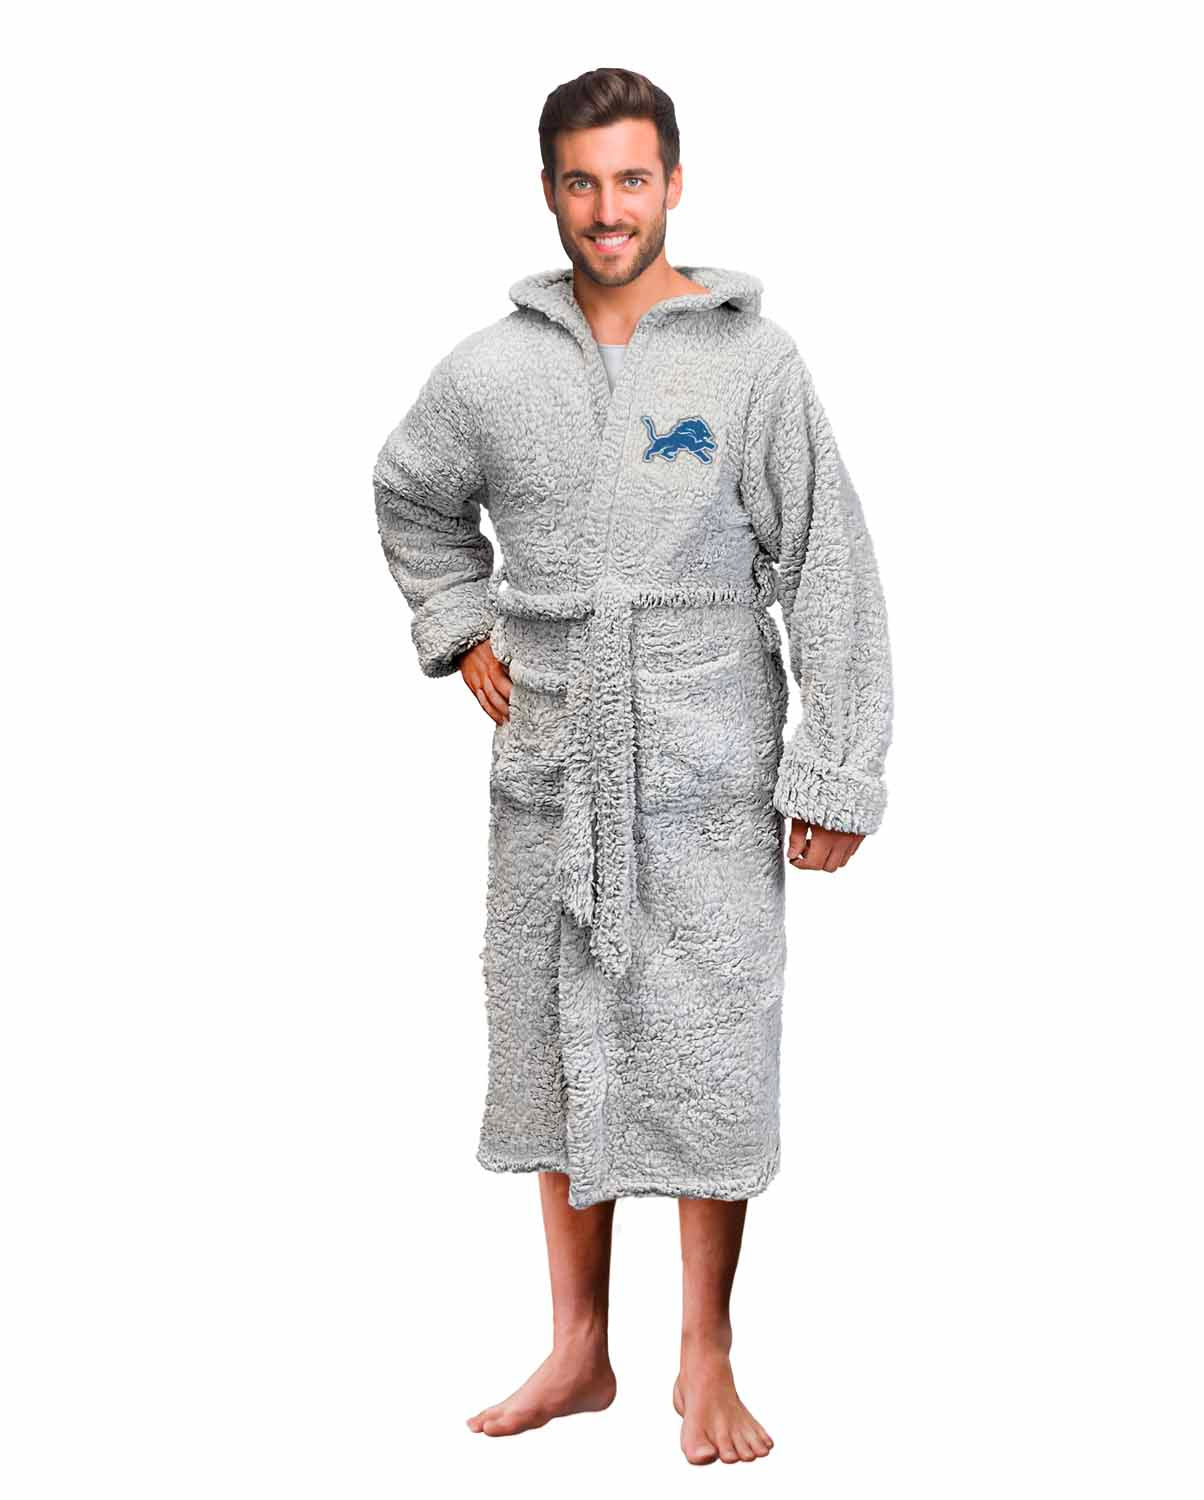 Detroit Lions NFL Plush Hooded Robe with Pockets - Gray